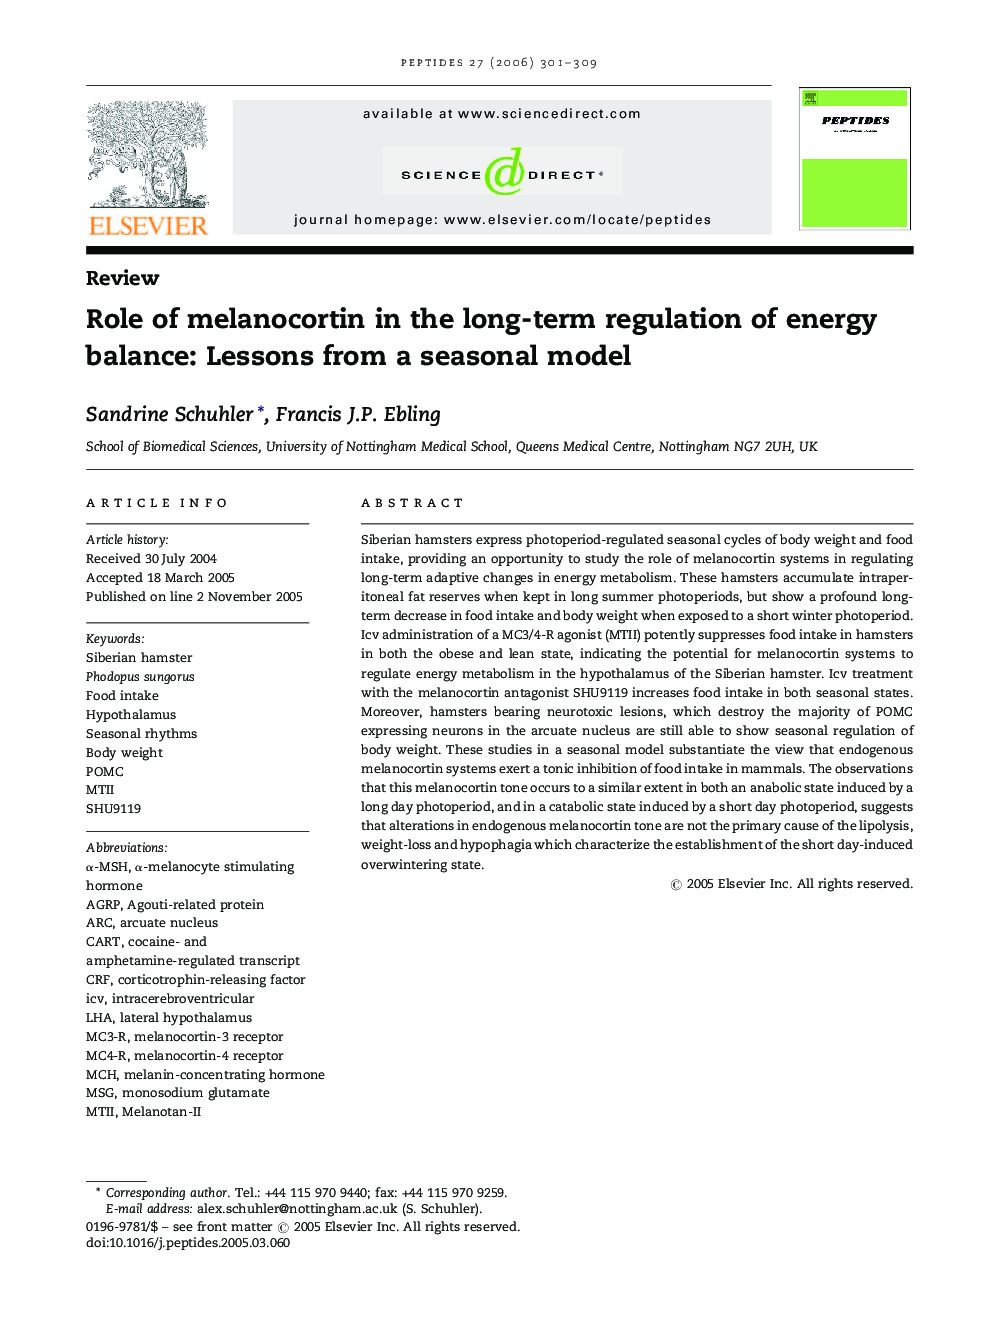 Role of melanocortin in the long-term regulation of energy balance: Lessons from a seasonal model